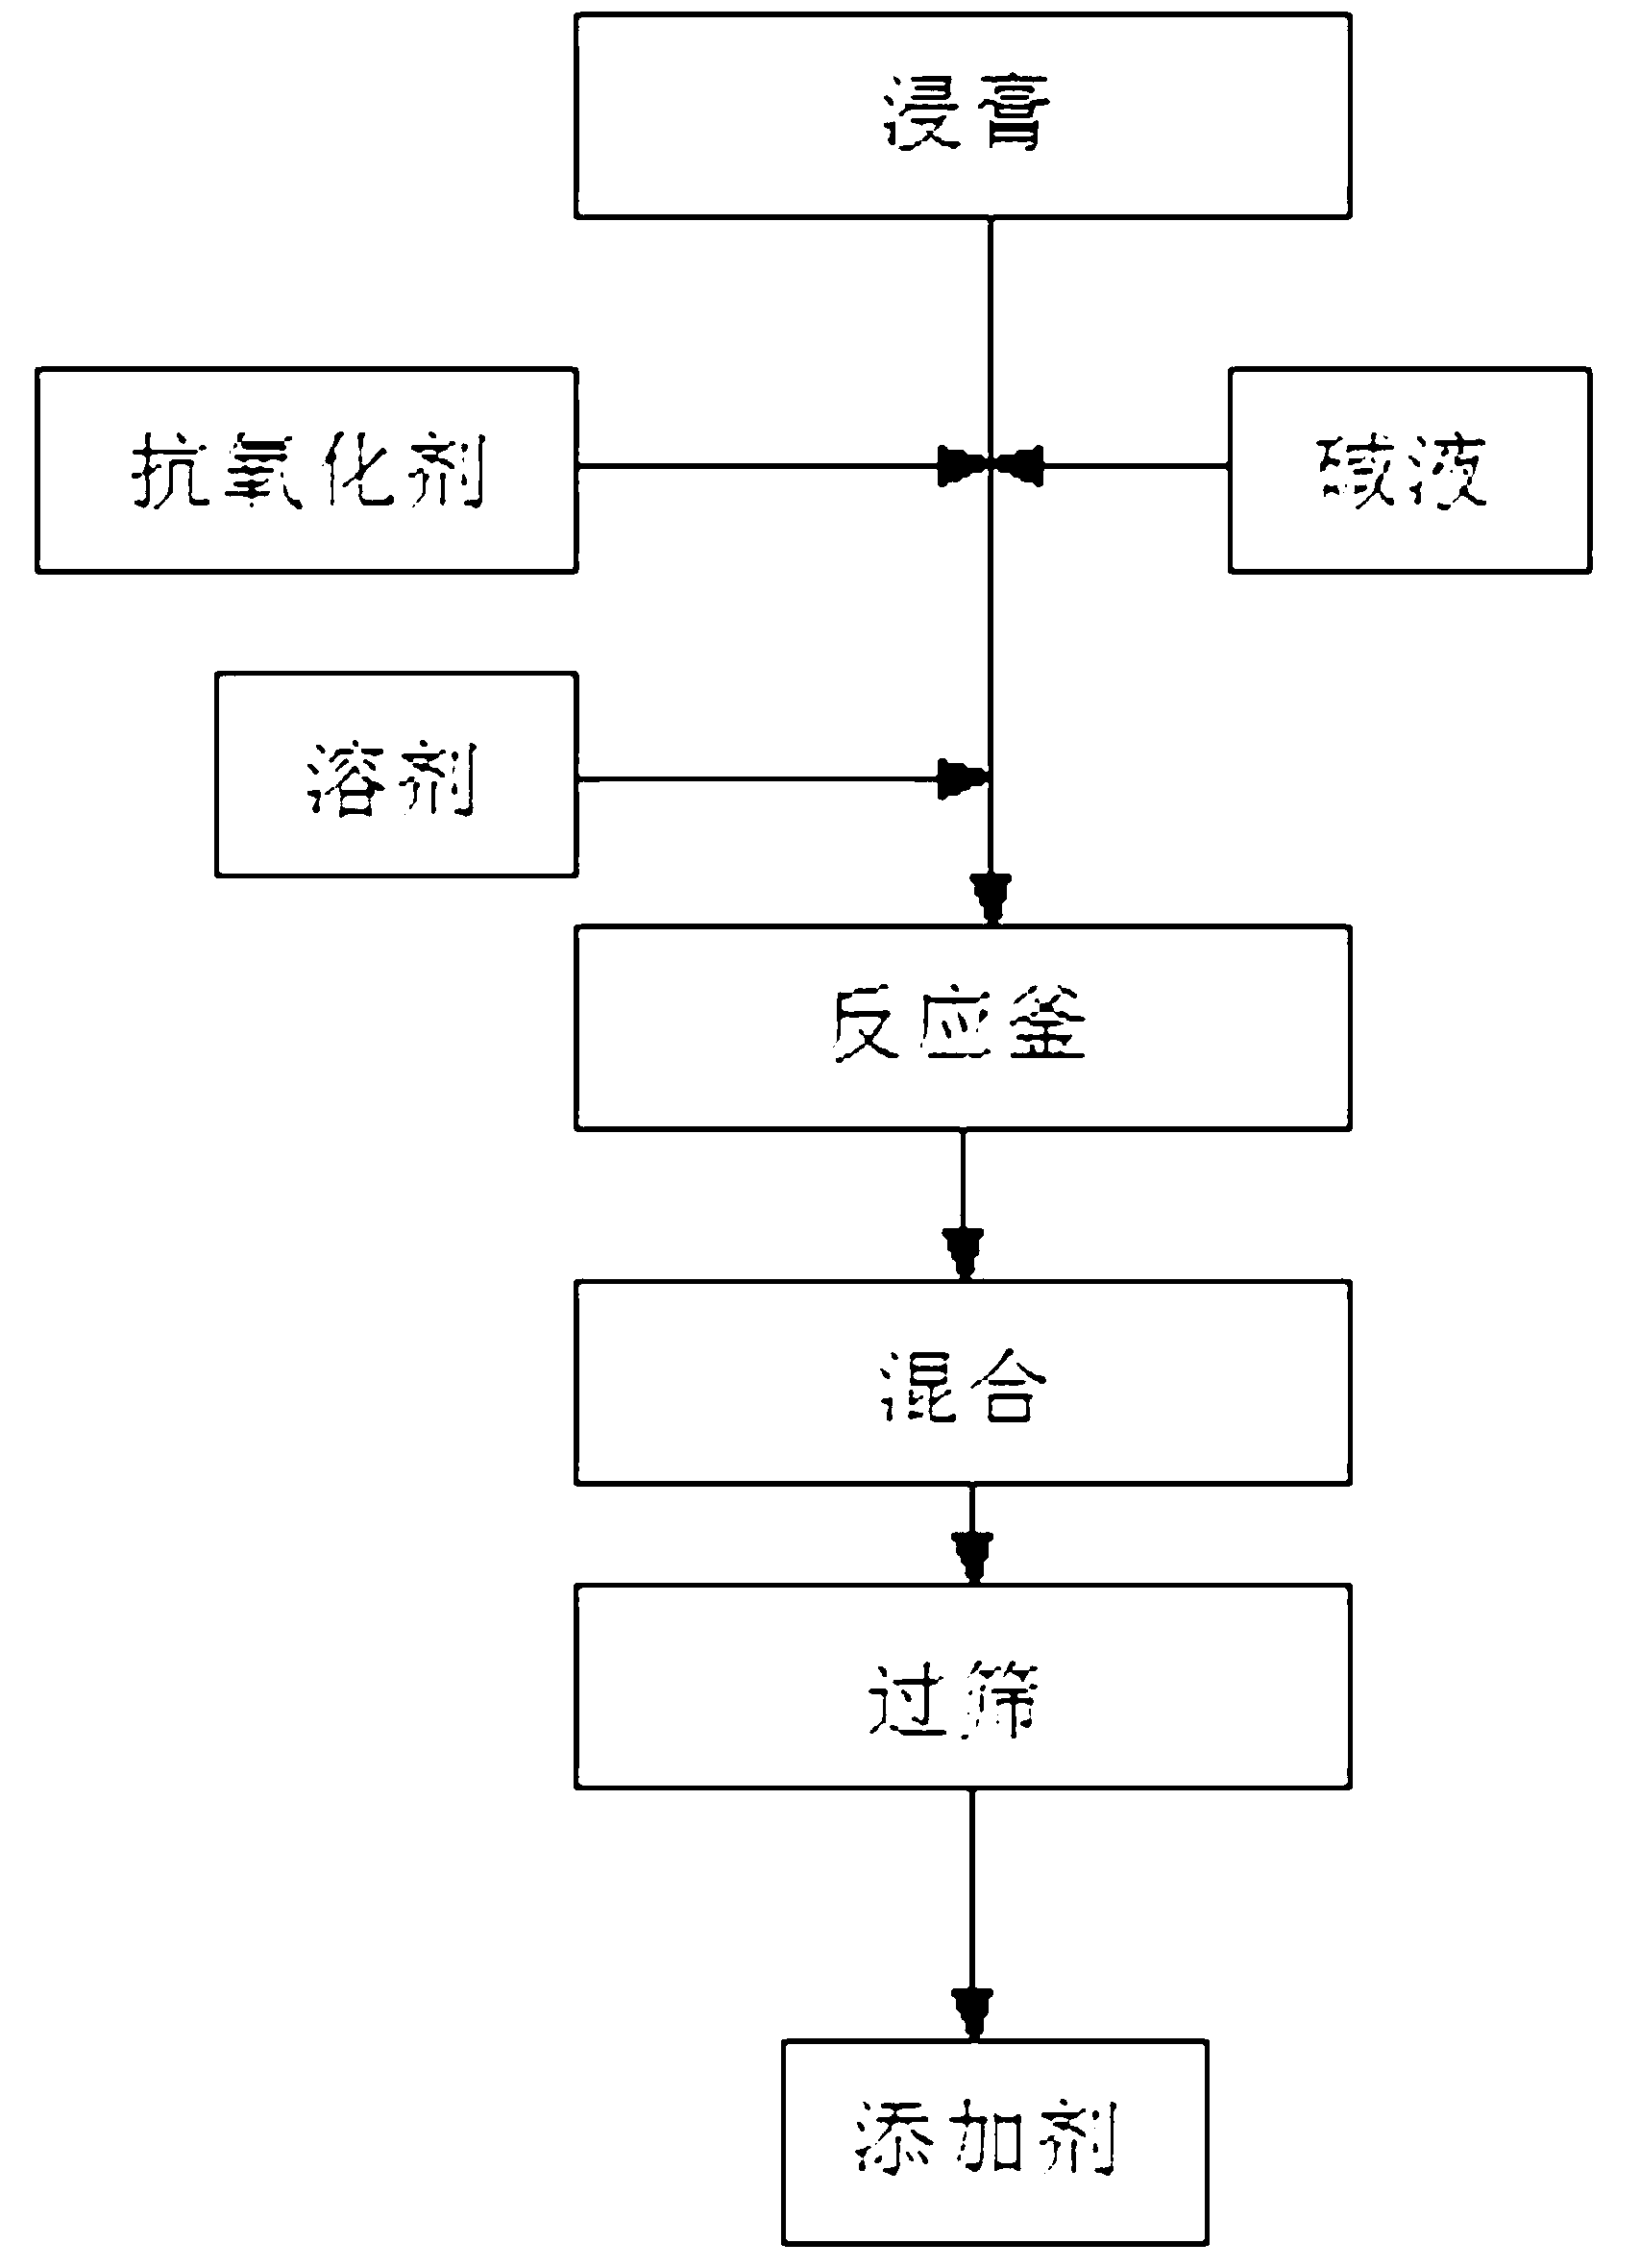 Production process of phytoxanthin feed additive